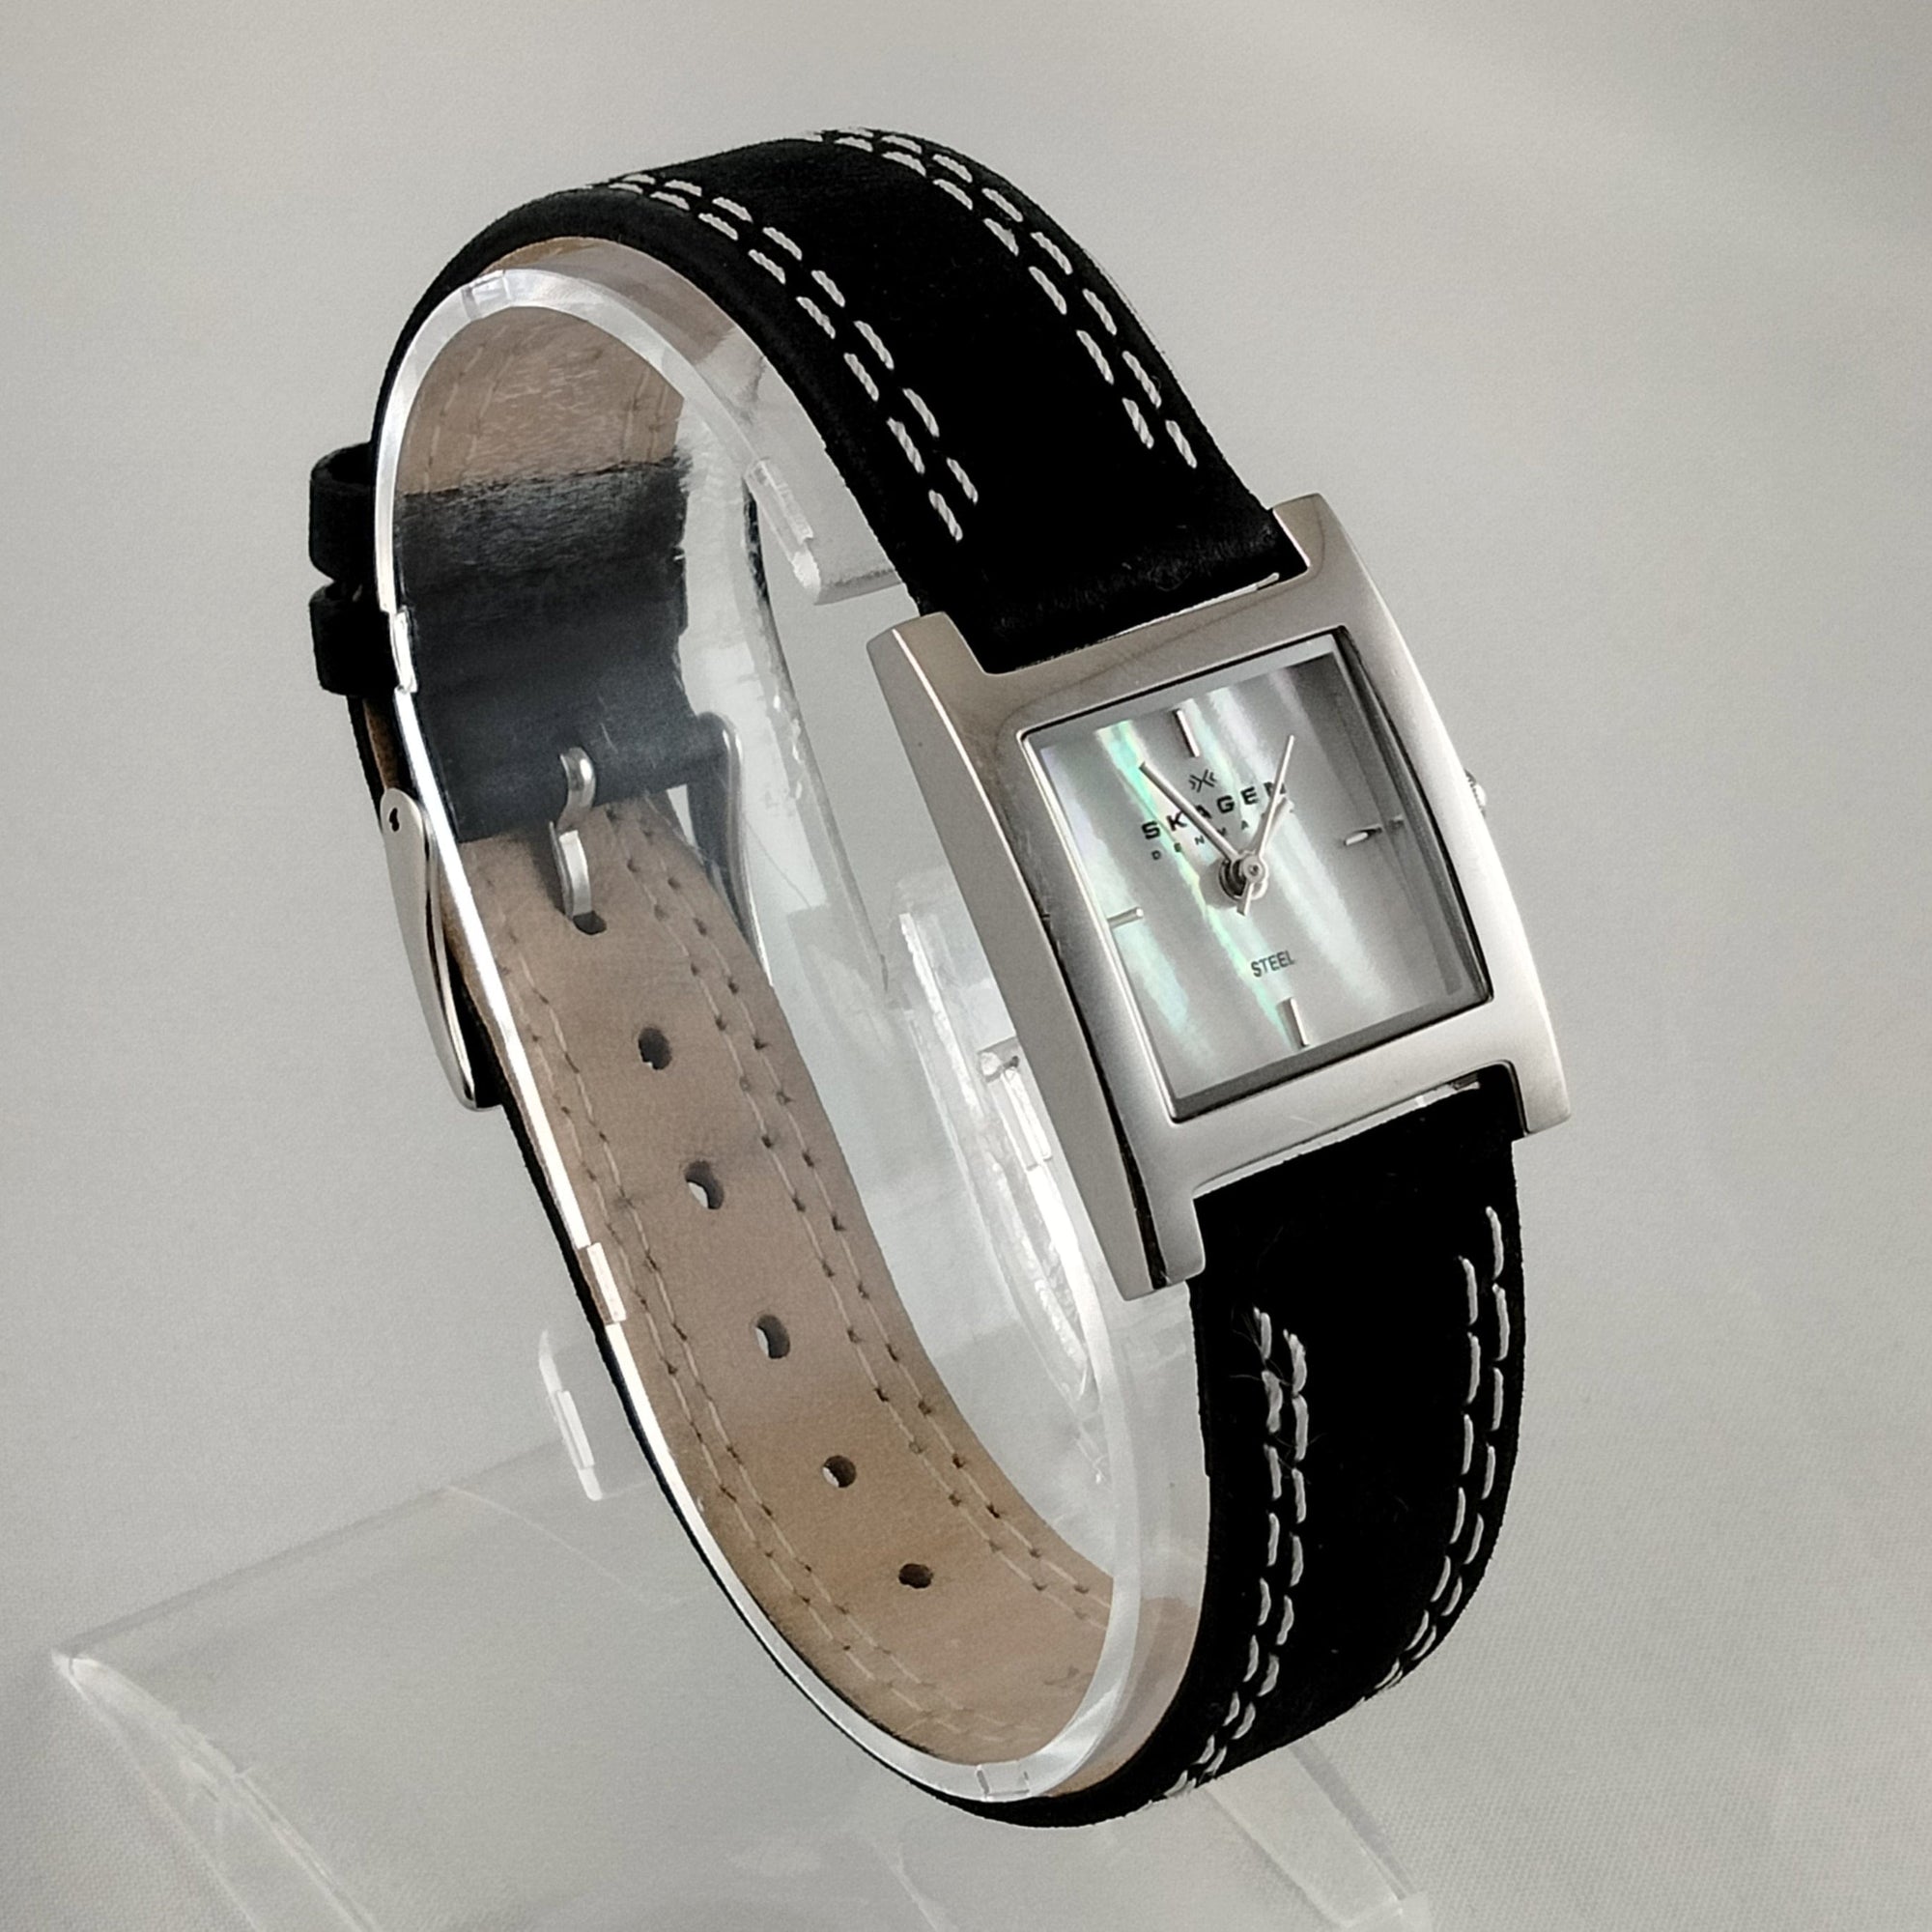 I Like Mikes Mid Century Modern Watches Skagen Unisex Stainless Steel Square Watch, Mother of Pearl Dial, Black Suede Strap with White Stitching